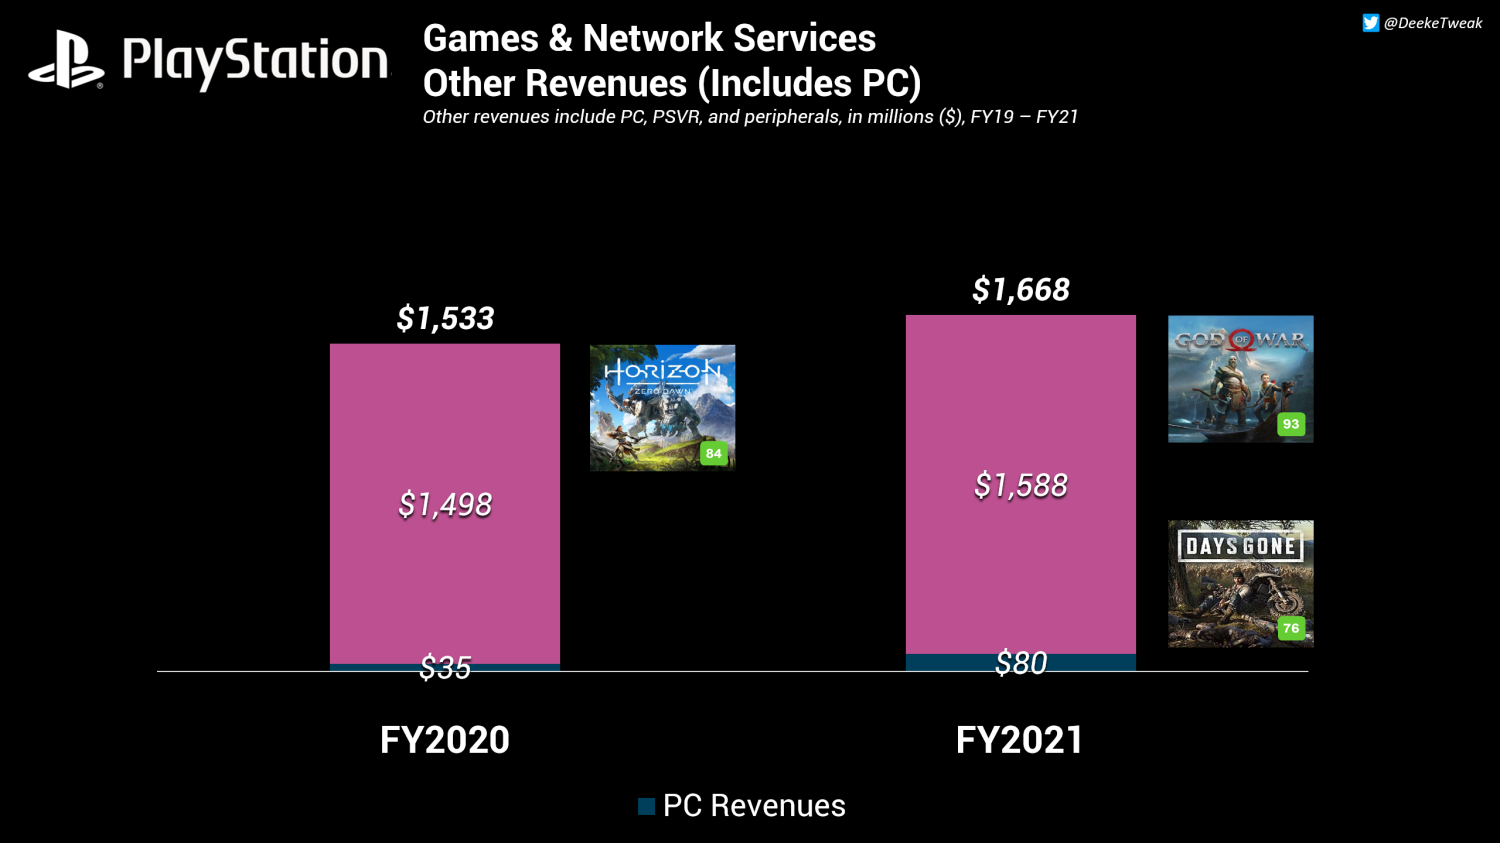 PC ports of PlayStation titles will launch 2-3 years after initial release